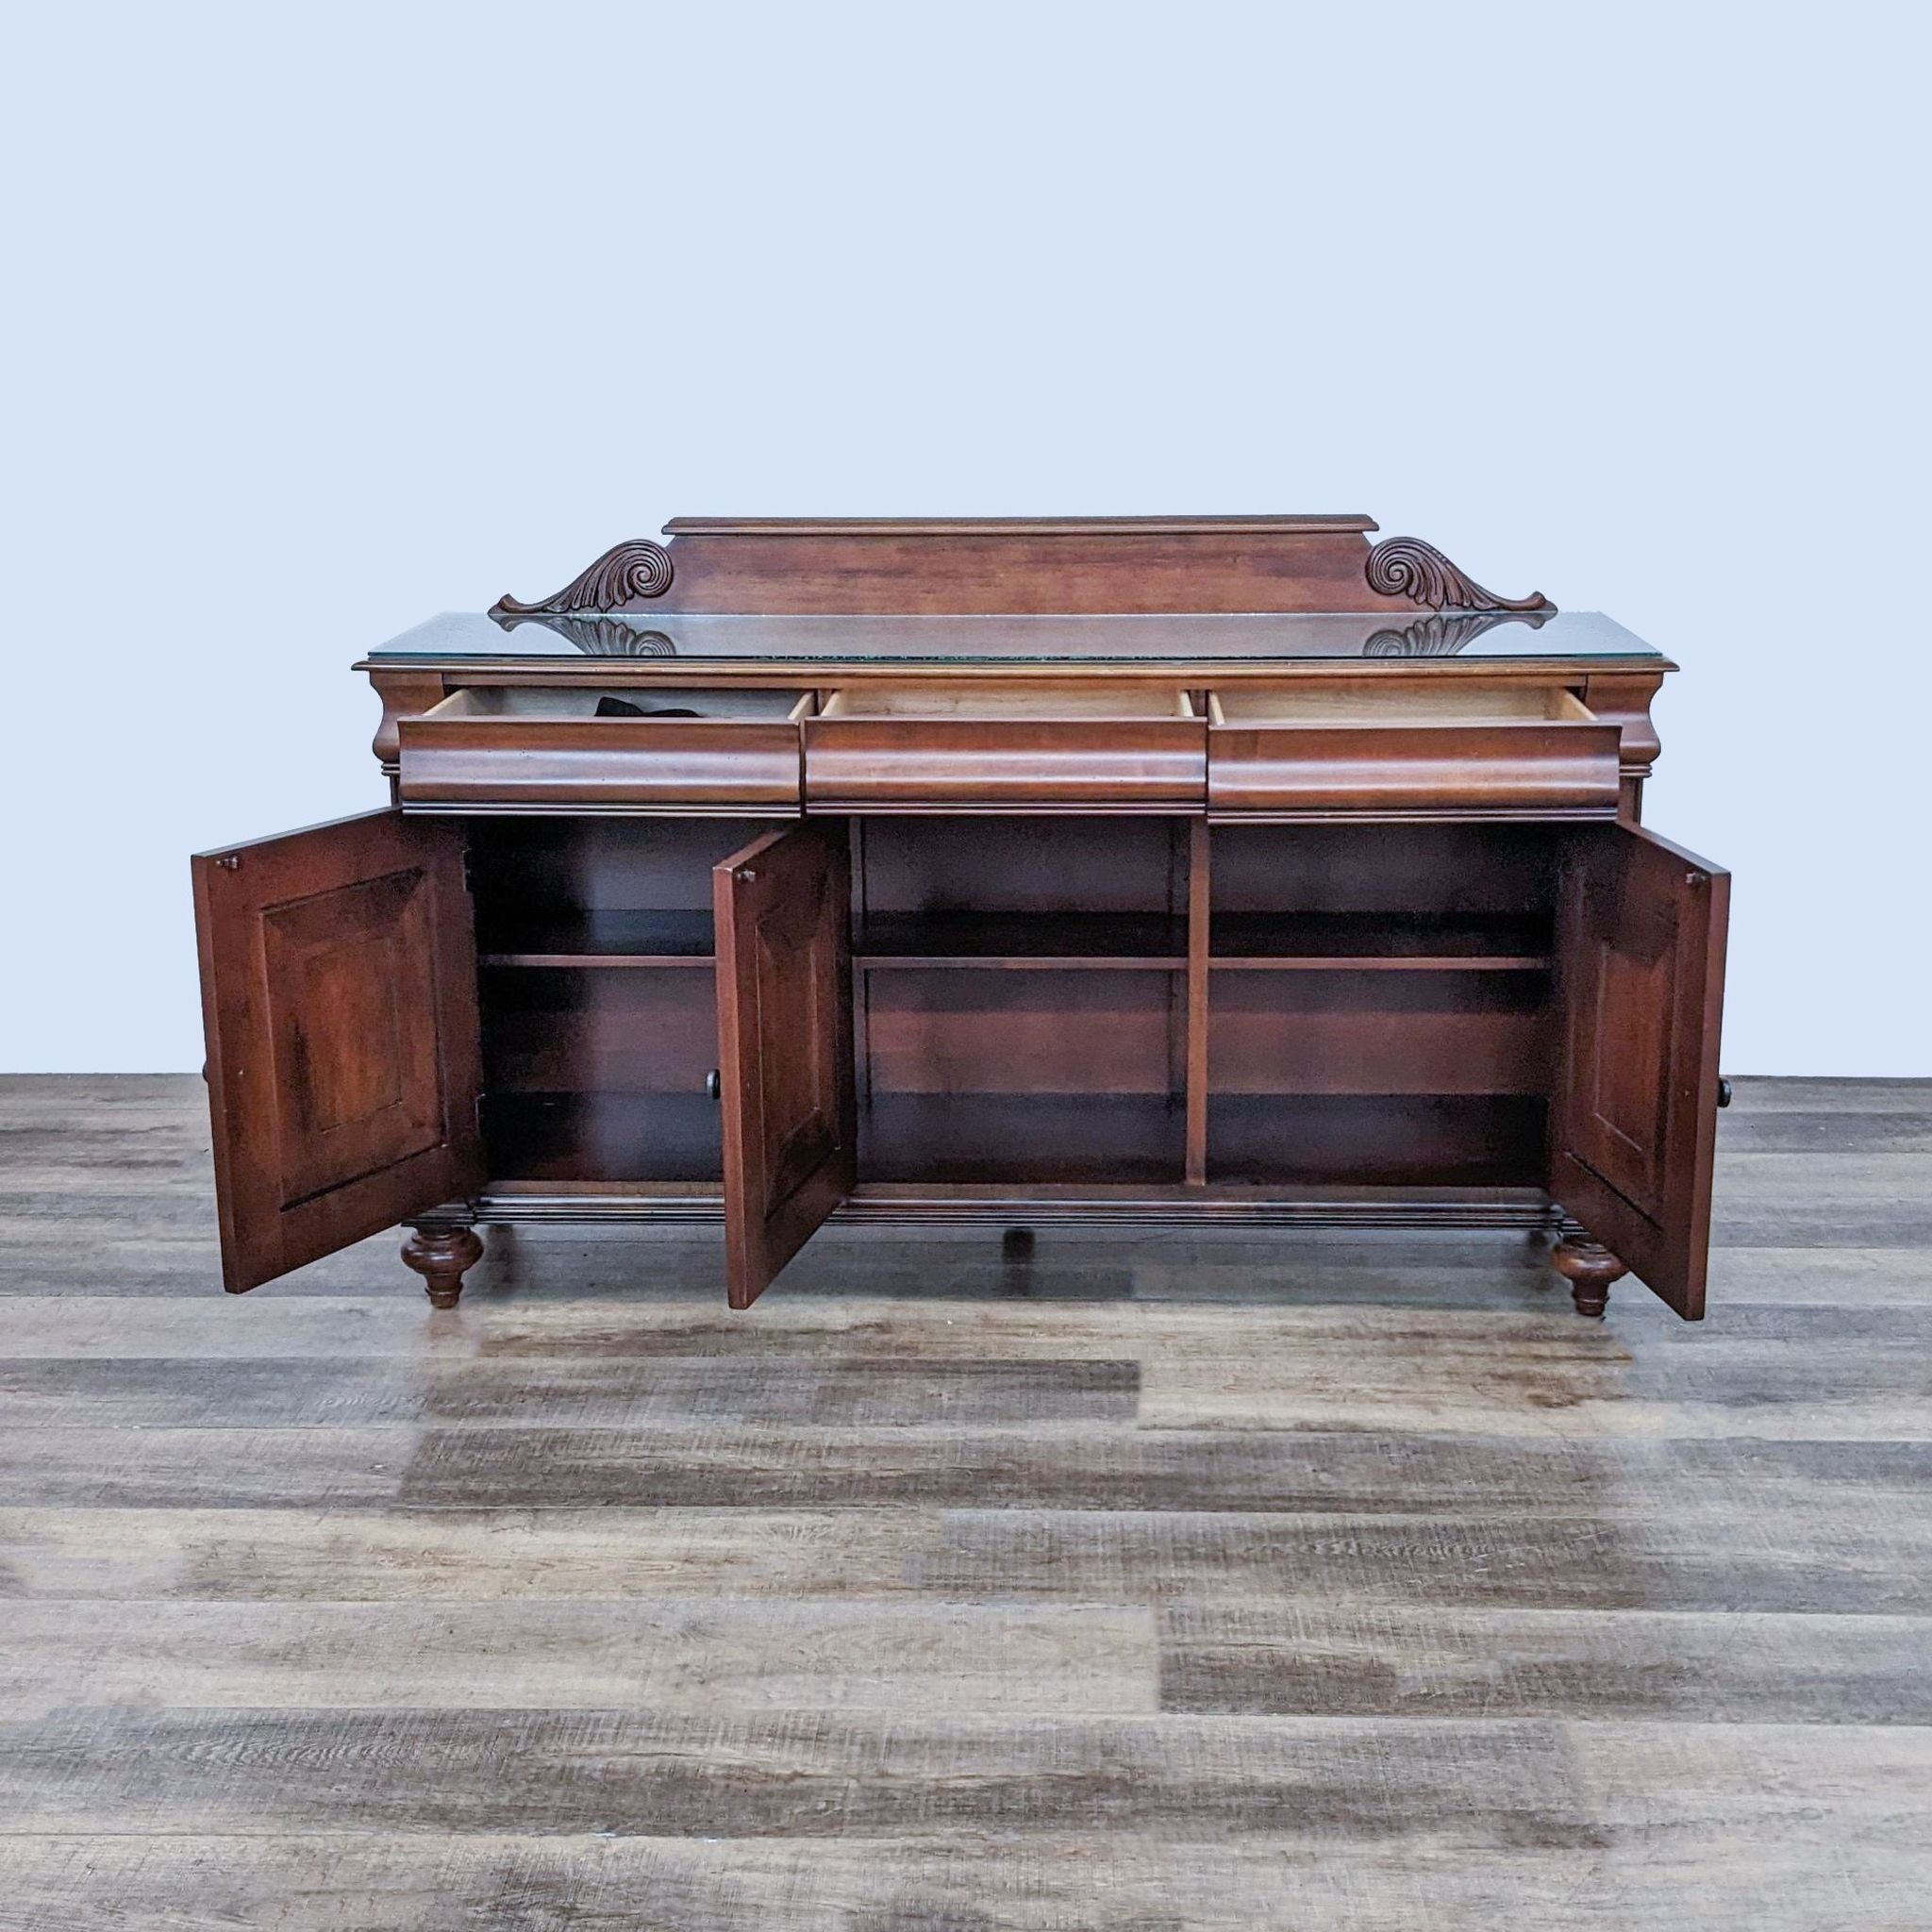 Alt text 2: Open Ethan Allen sideboard revealing interior shelves, with impressive turned feet and moldings visible.